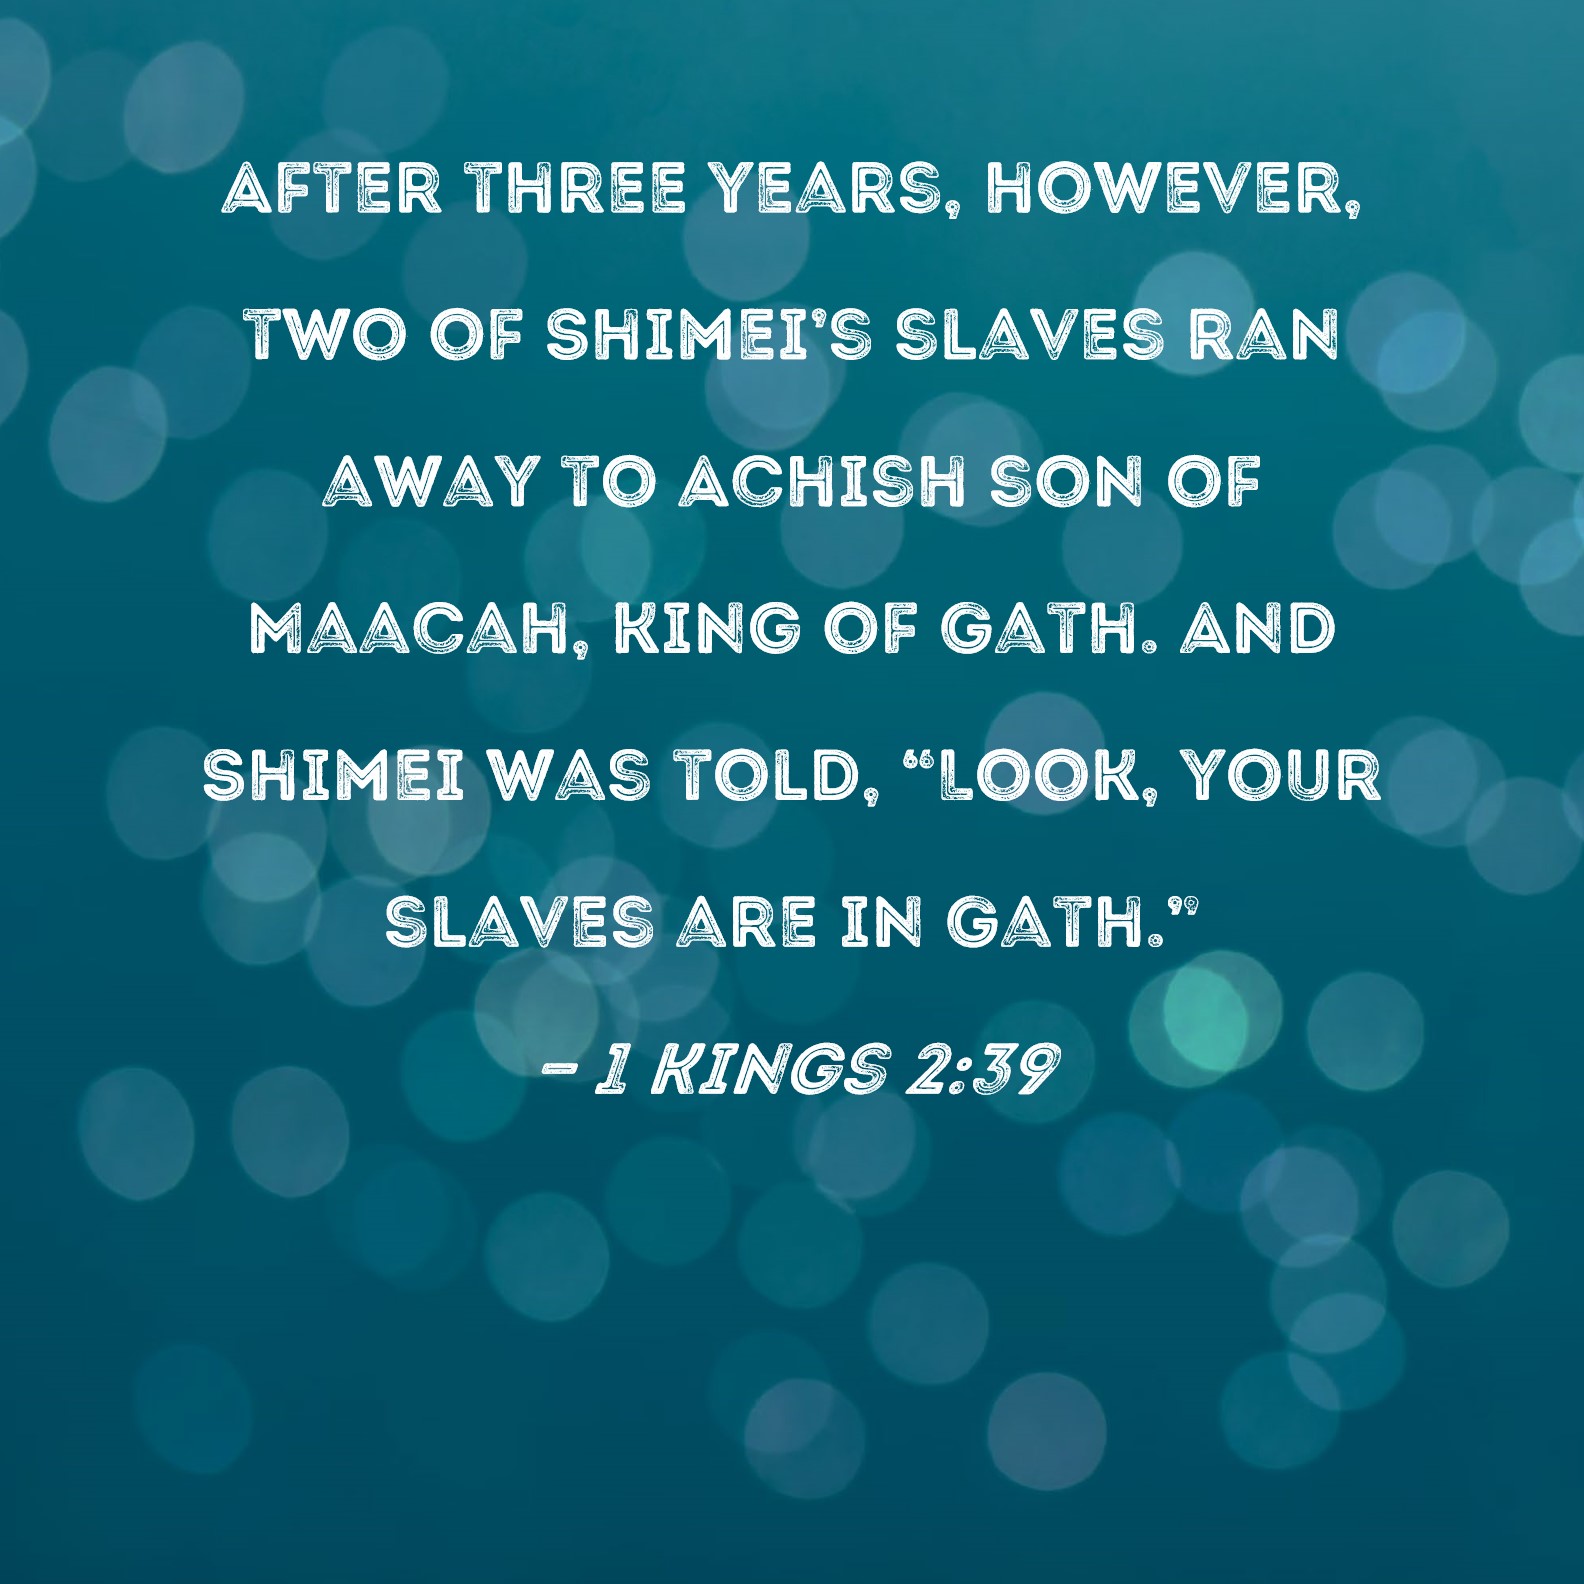 1 Kings 2:39 After three years, however, two of Shimei's slaves